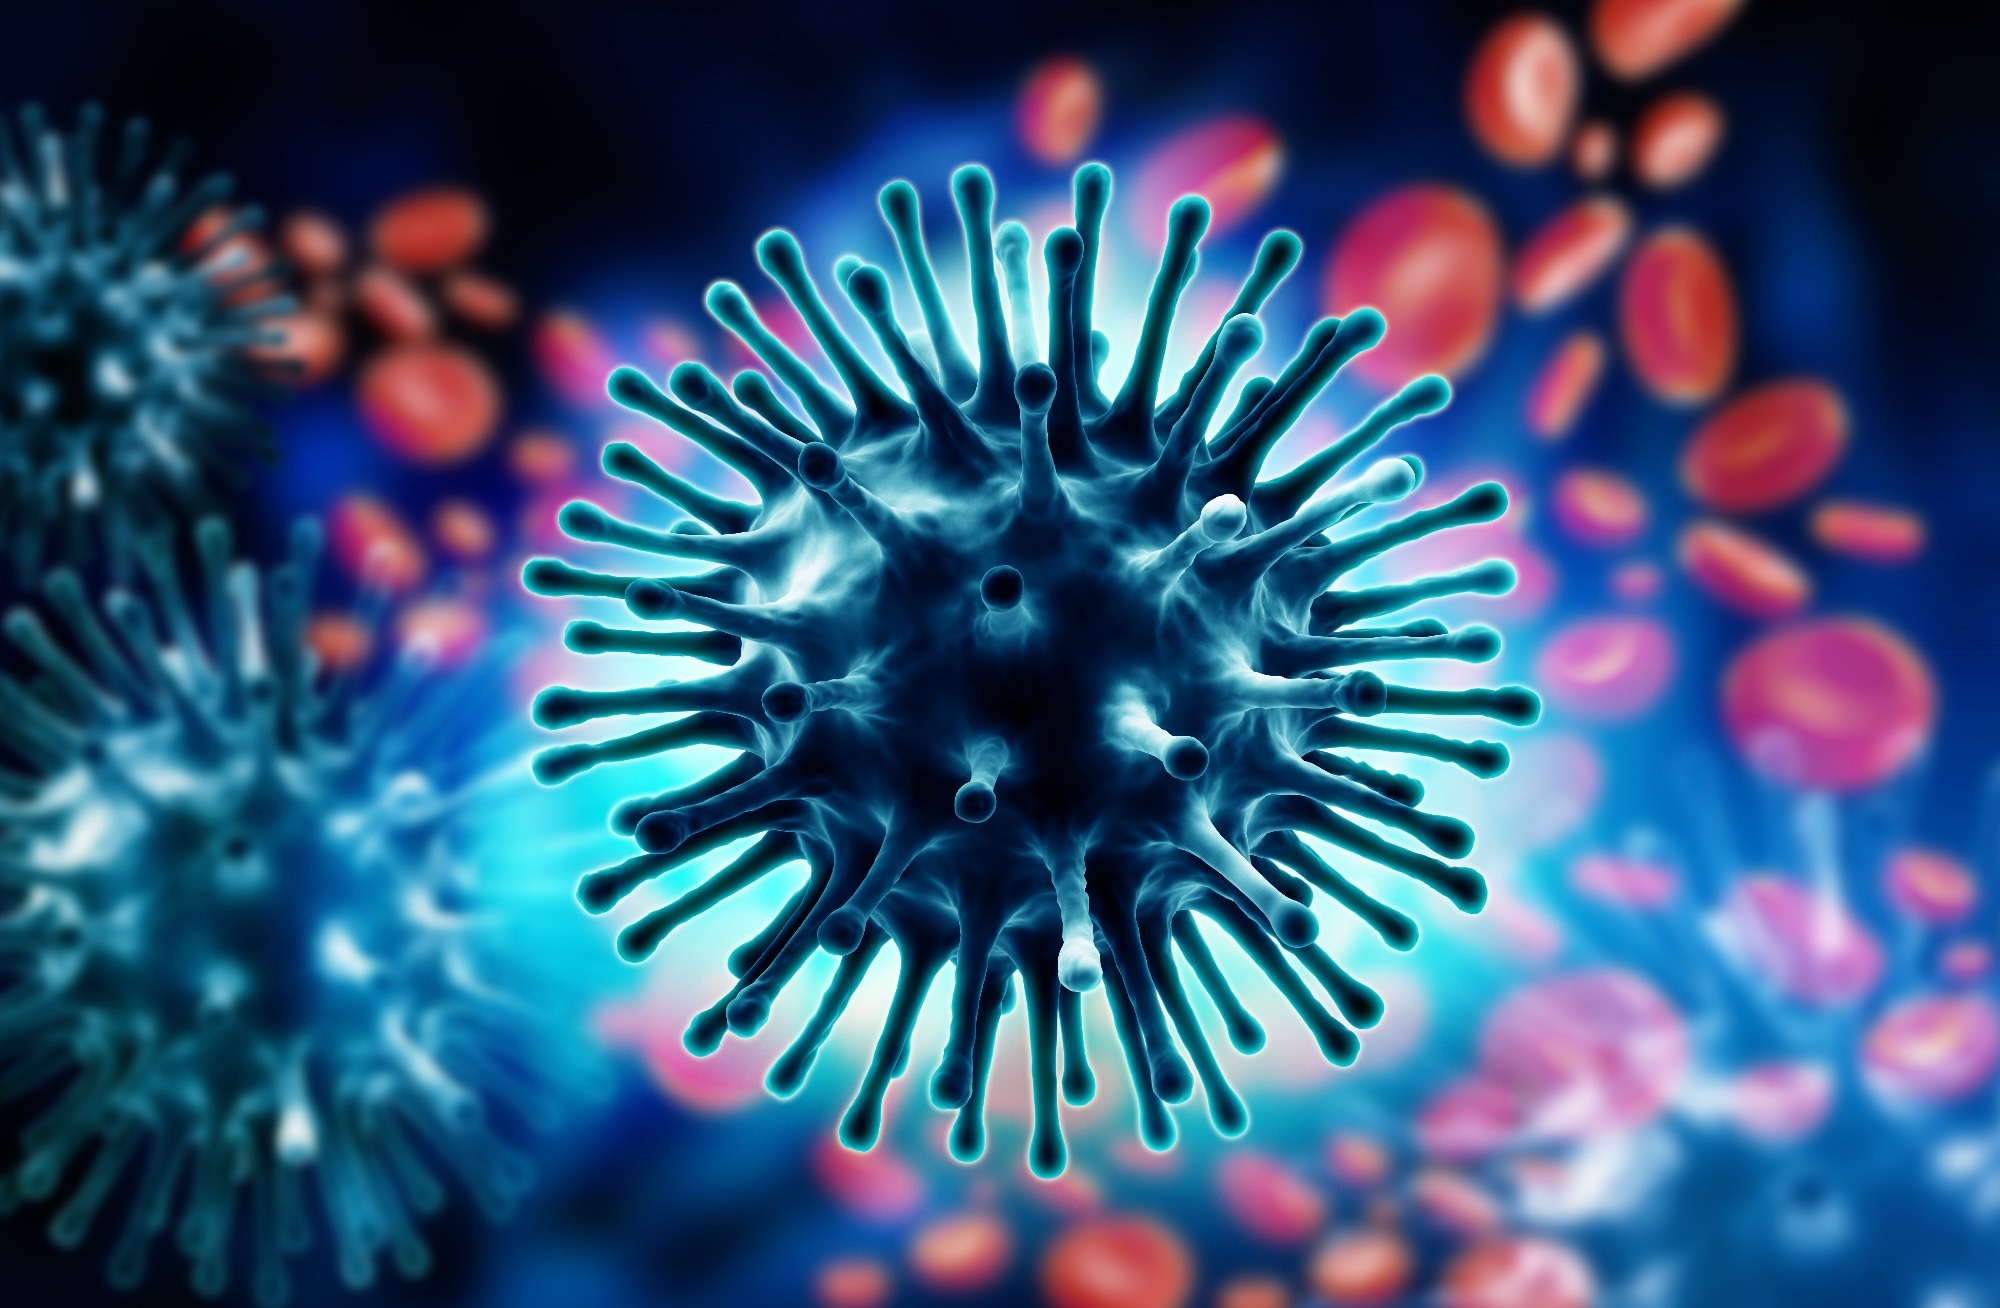 Study: The genomic landscape of swine influenza A viruses in Southeast Asia. Image Credit: LiyaGraphics/Shutterstock.com